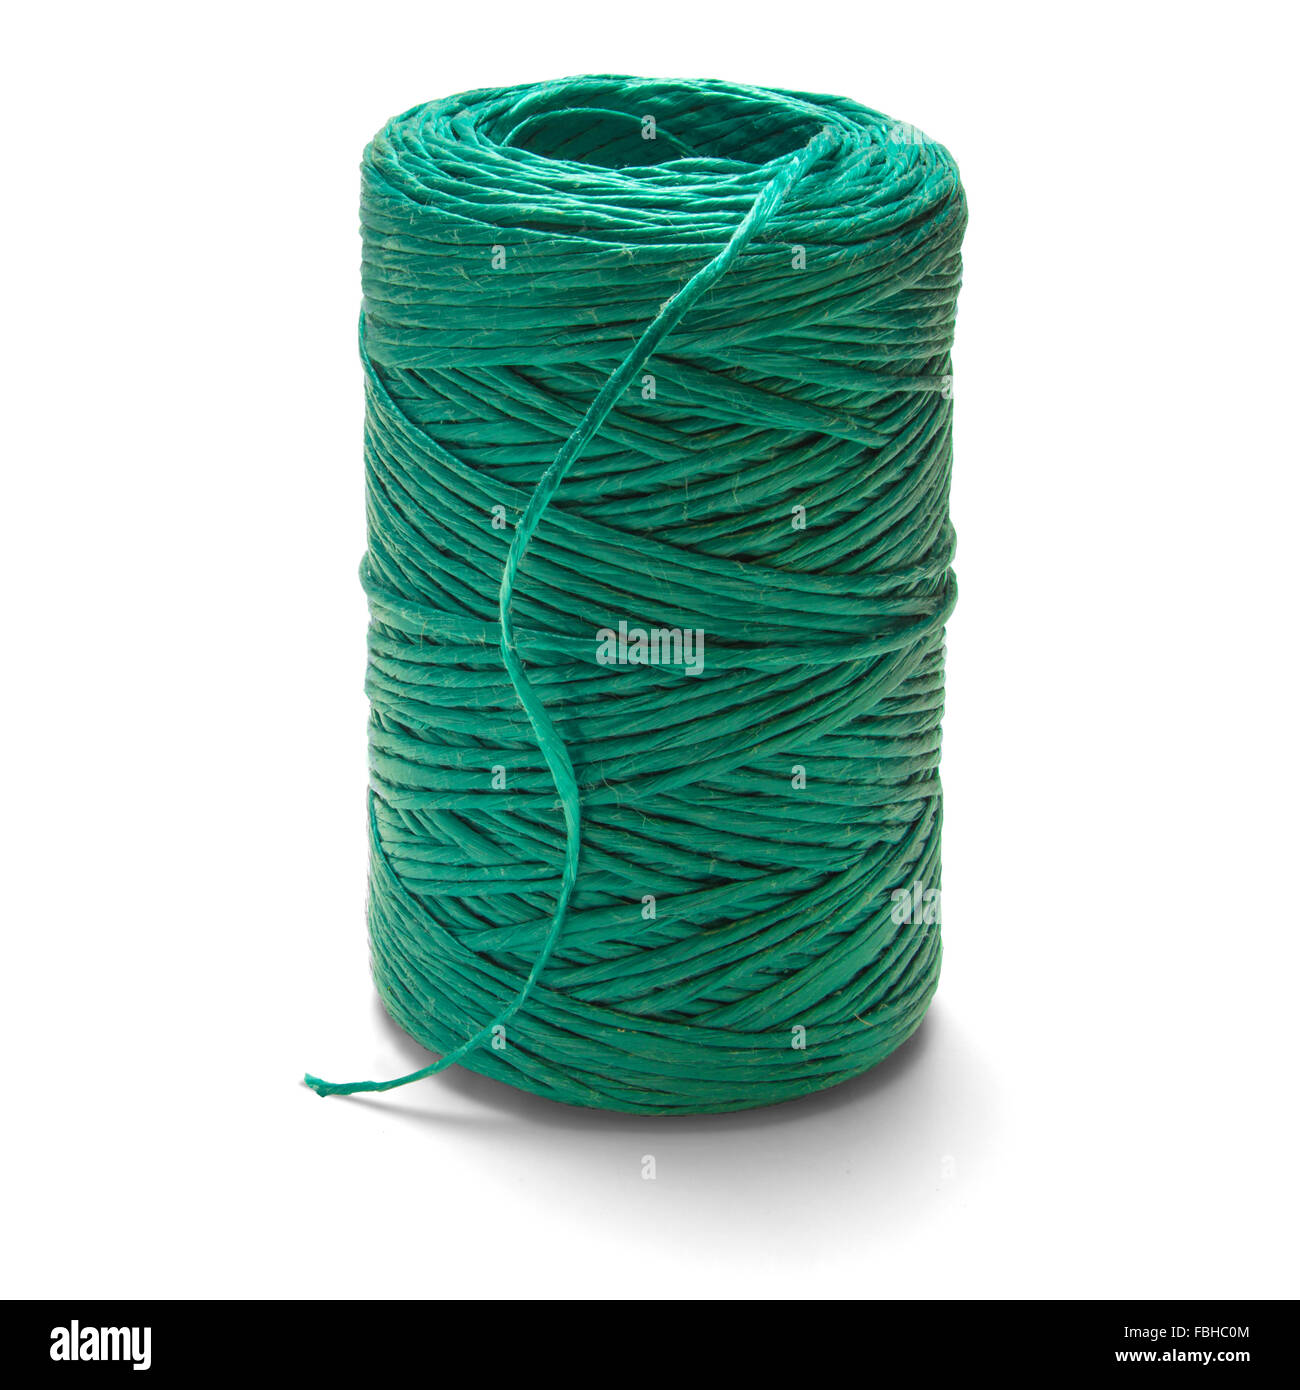 https://c8.alamy.com/comp/FBHC0M/green-polypropylene-garden-string-twine-isolated-on-white-background-FBHC0M.jpg